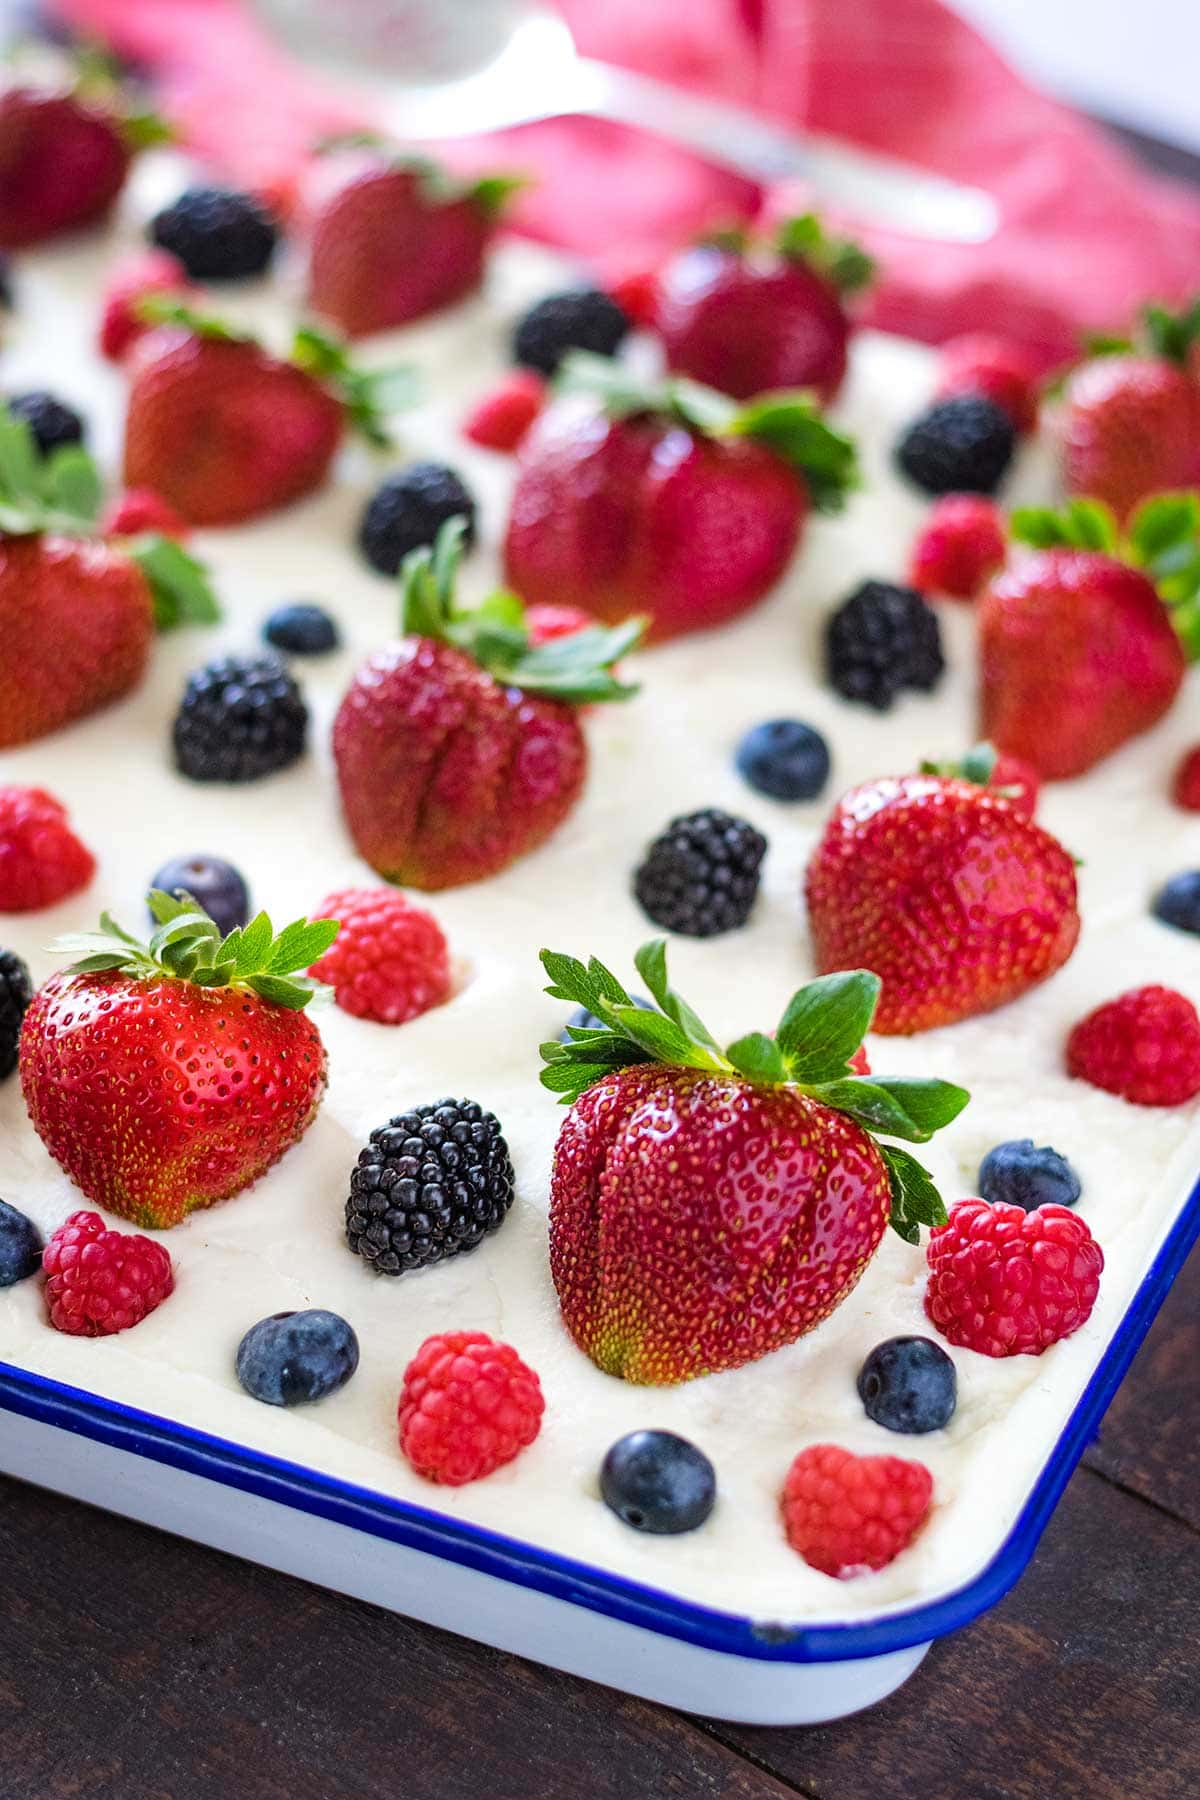 Up close image of chantilly sheet cake topped with fresh strawberries, raspberries, blueberries and blackberries.